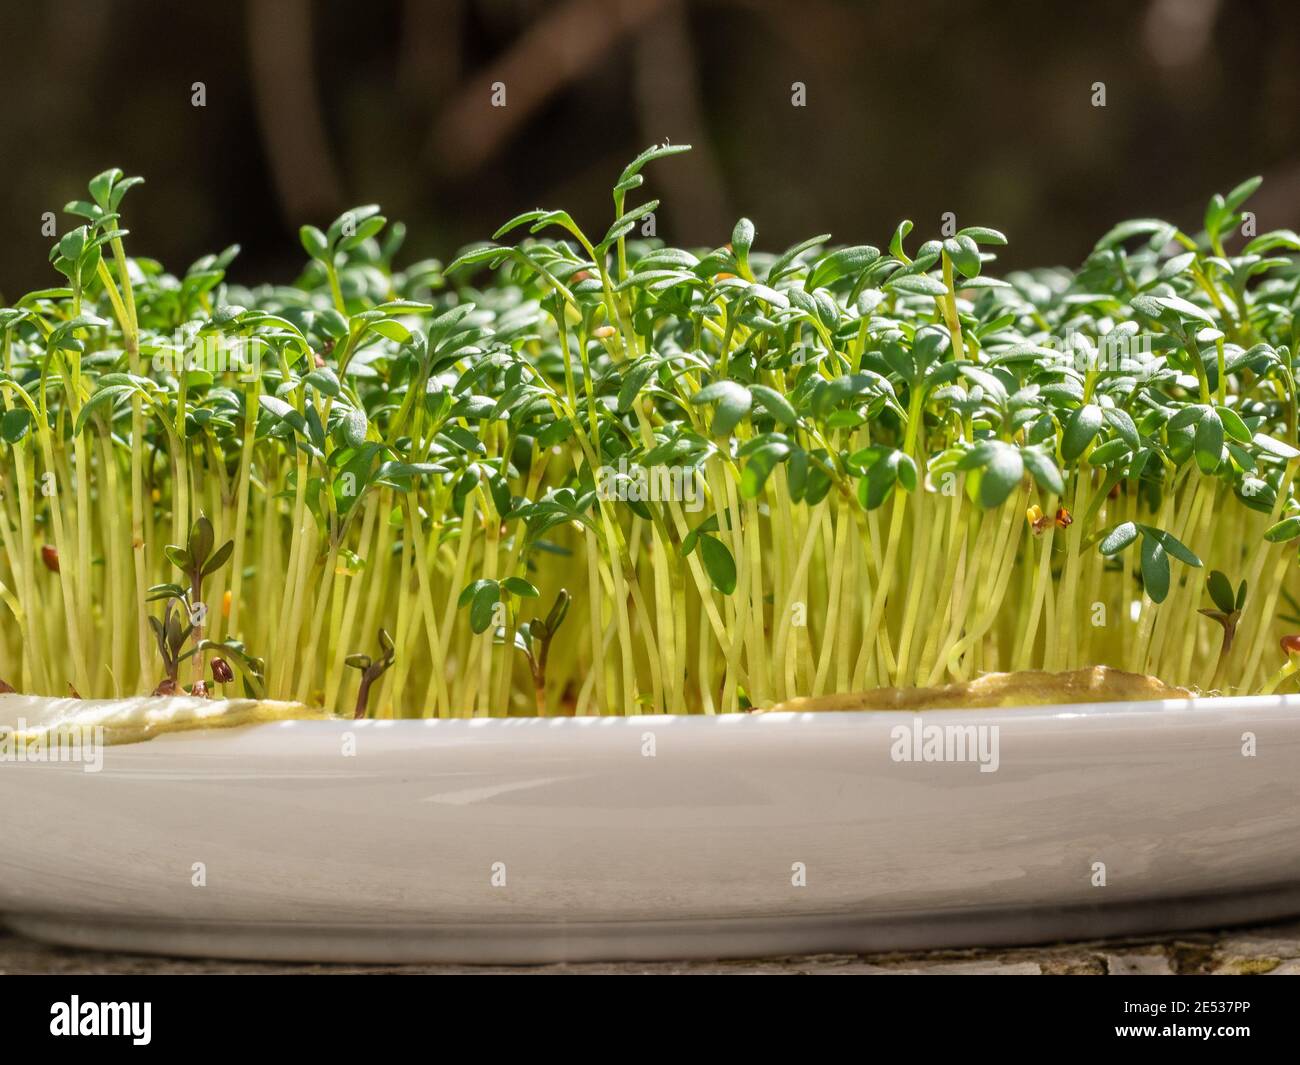 Garden cress (Lepidium sativum) is a fast-growing, edible herb that is botanically related to watercress and mustard, sharing their peppery, tangy fla Stock Photo